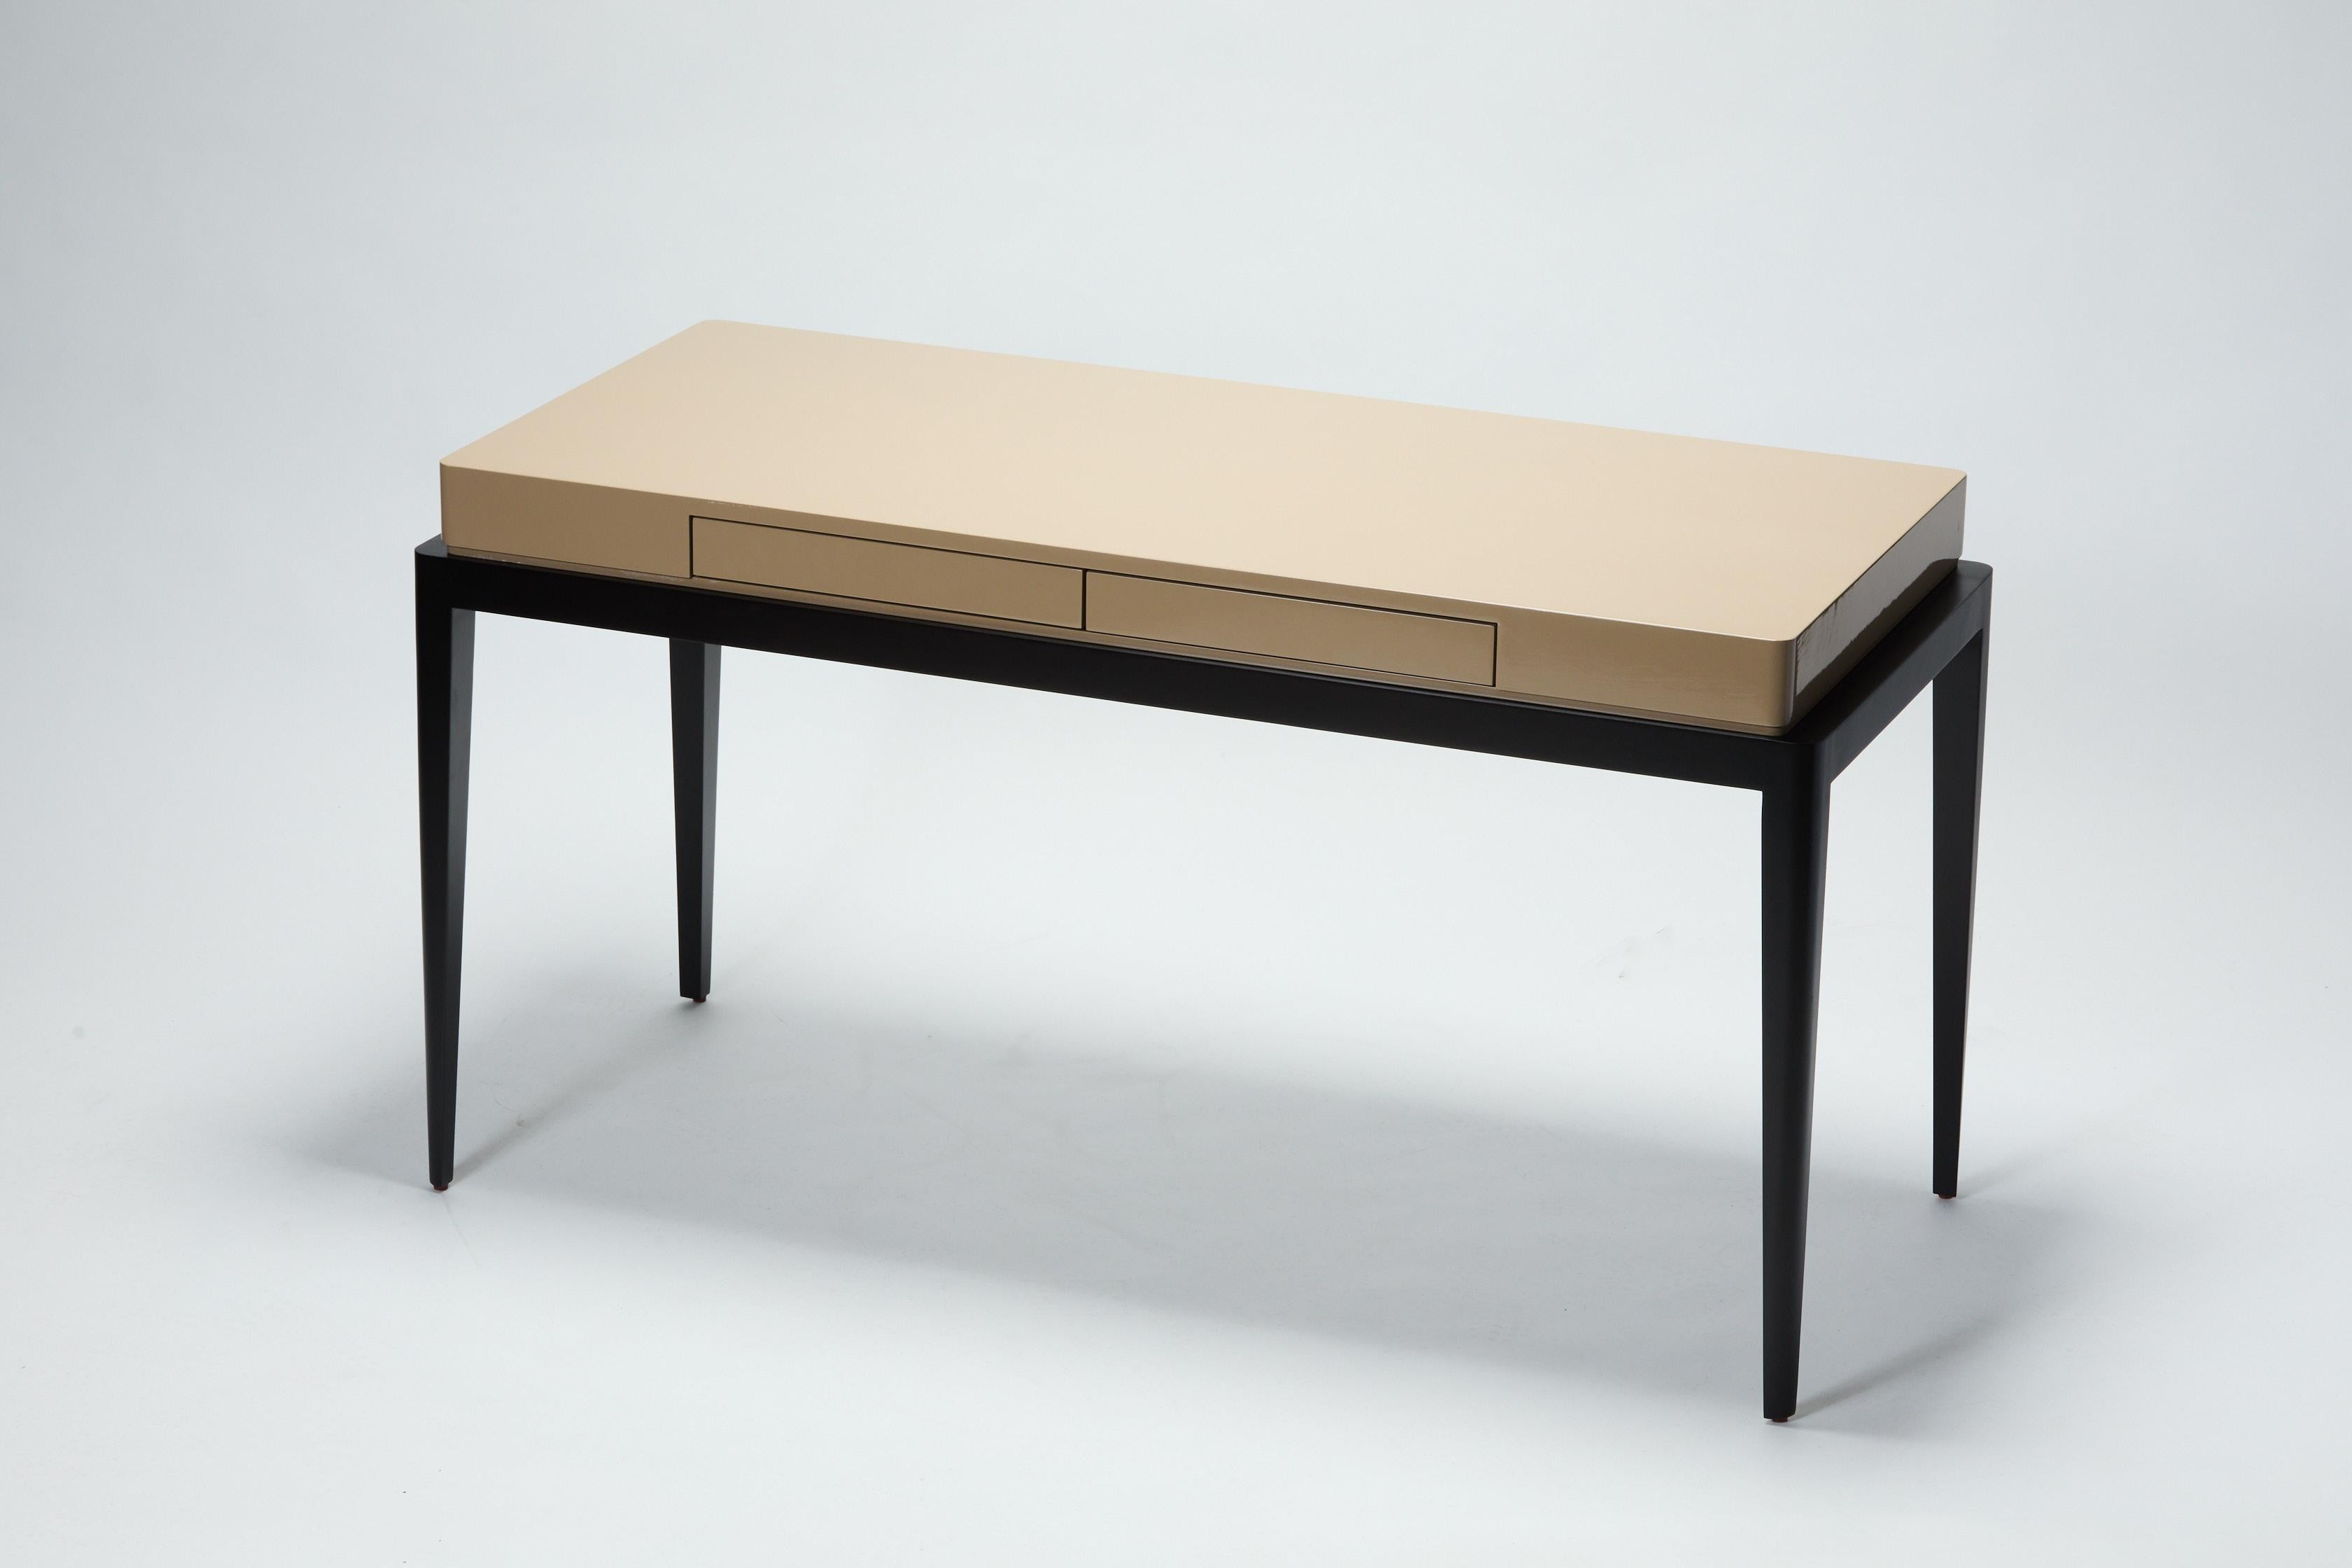 The perfect interior writing desk. Size: 160cm
Flat surface, smooth, purity of the line only asking to be inhabited. If it is a
console or a desk, TARA is a piece that distinguish itself with the power of its
minimalism. It is enough to dress up any